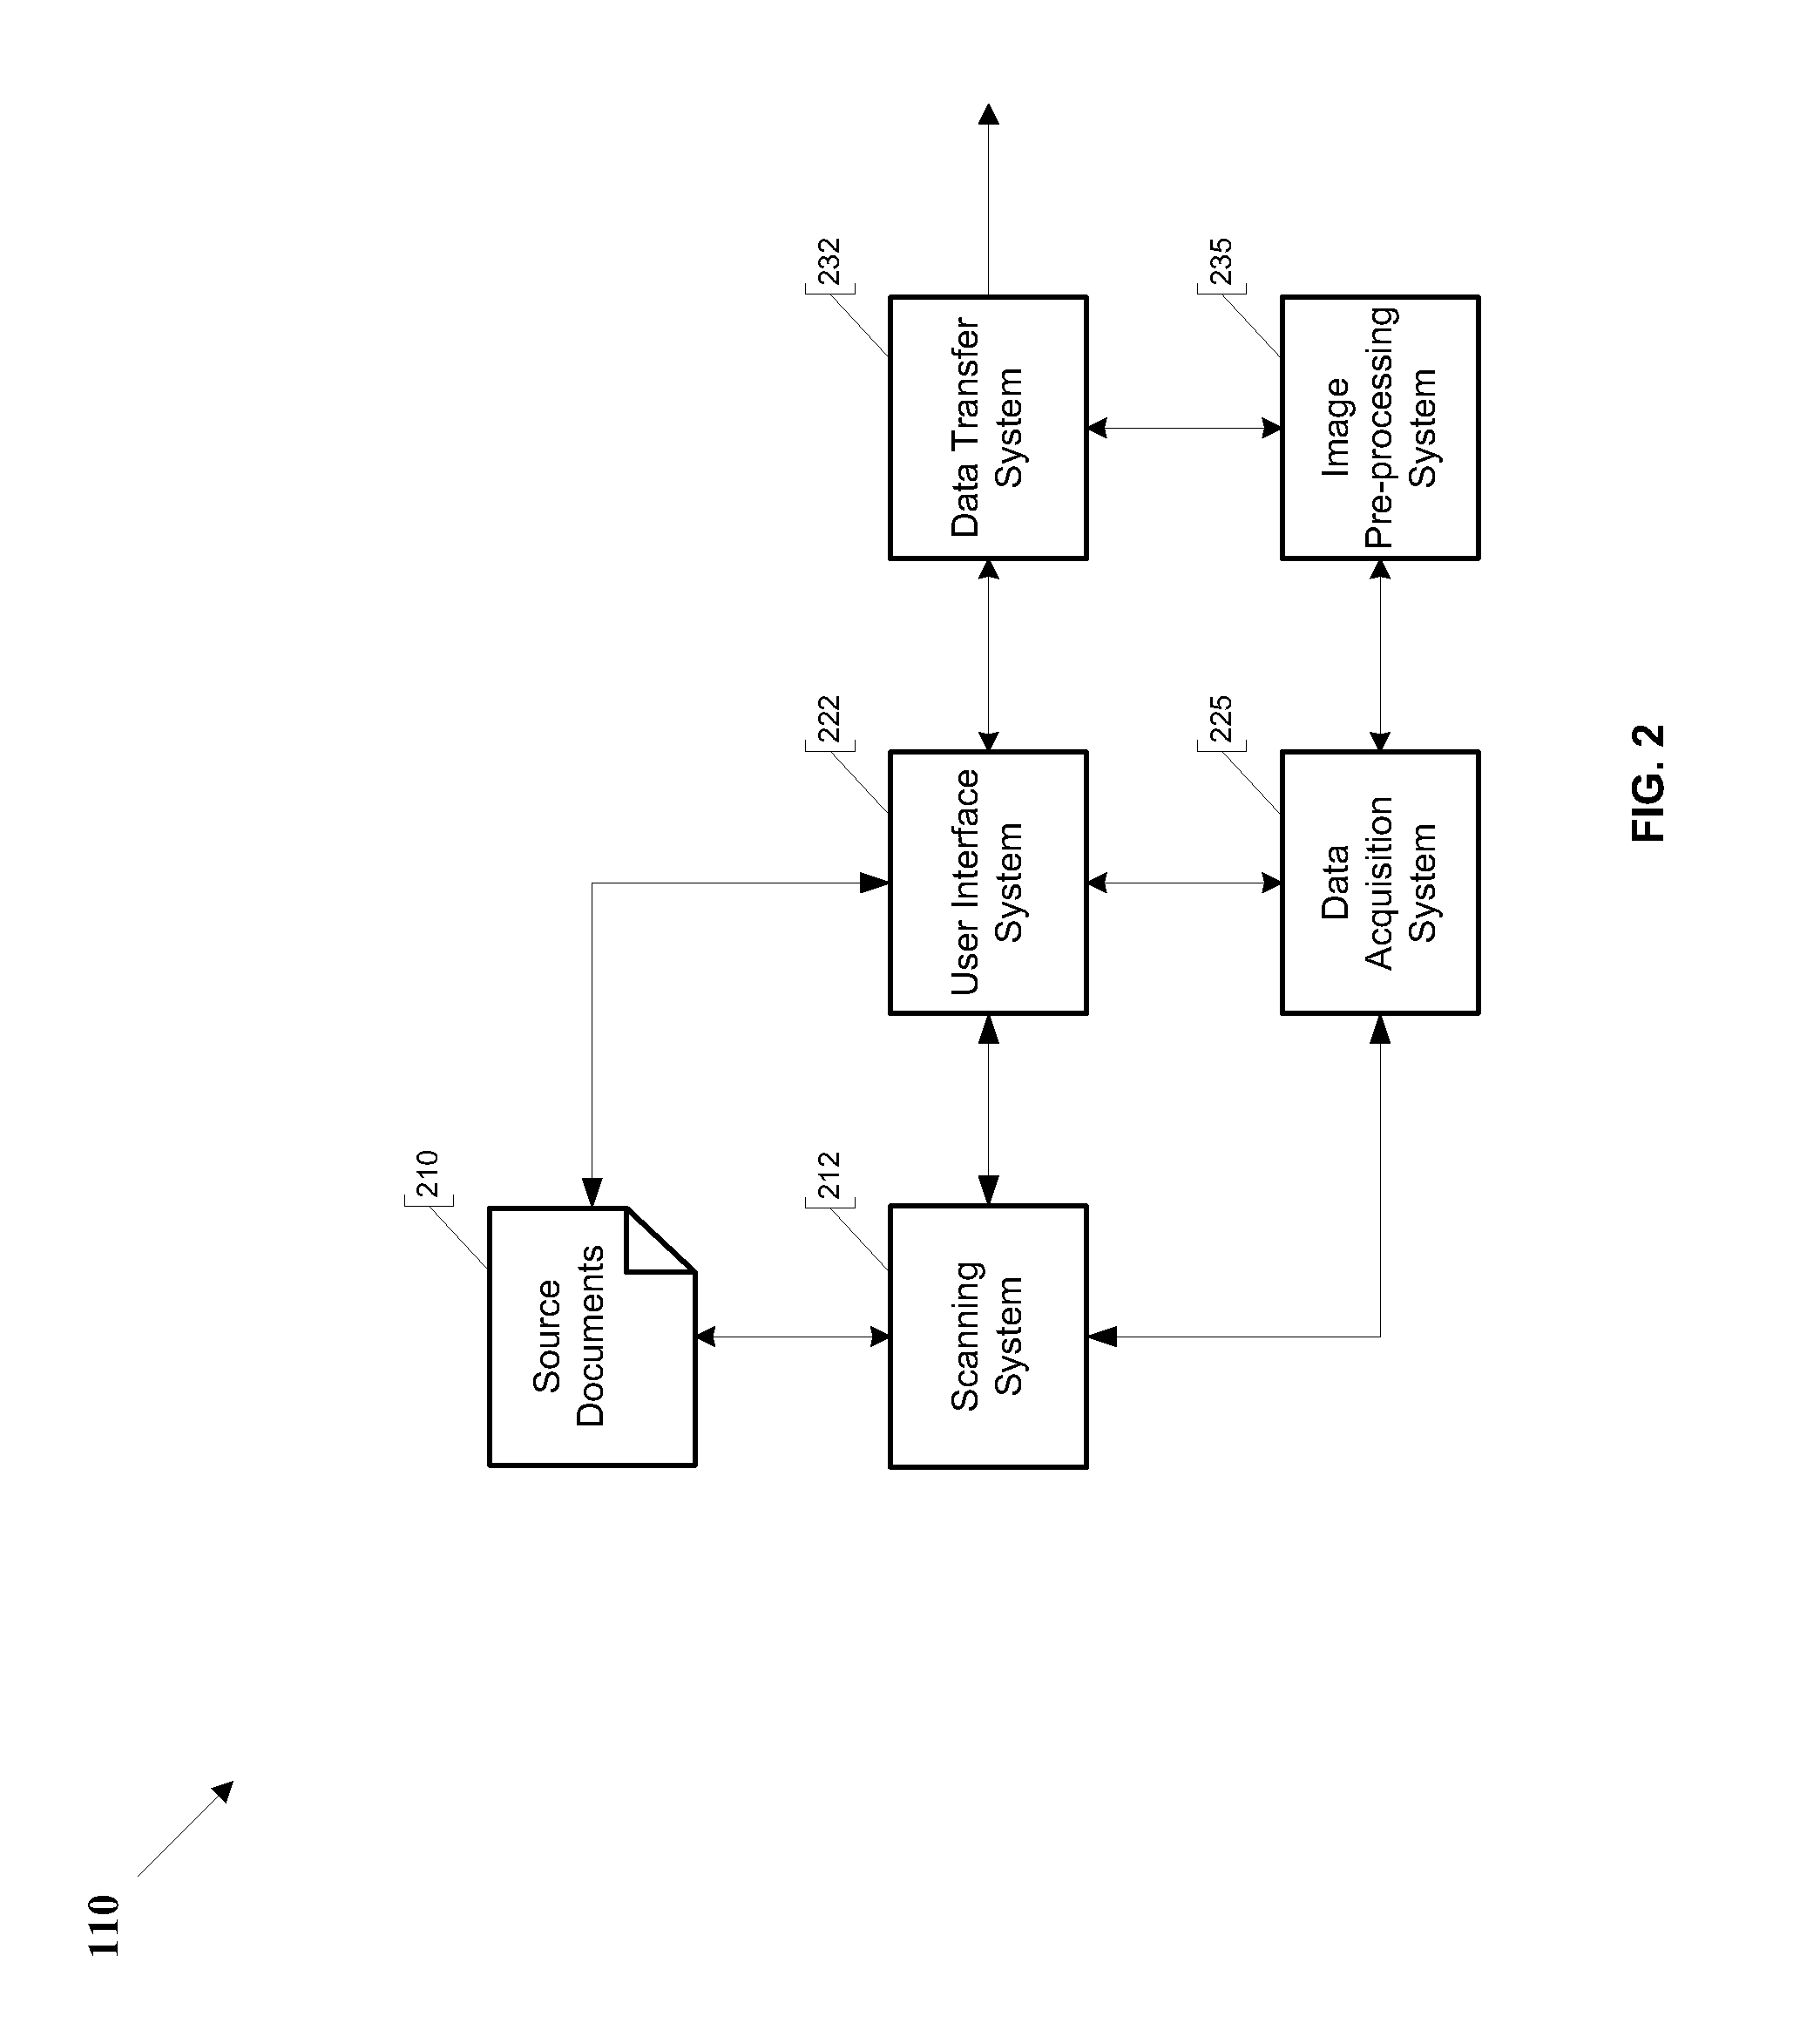 Systems and methods for automatically extracting data from eletronic documents using multiple character recognition engines